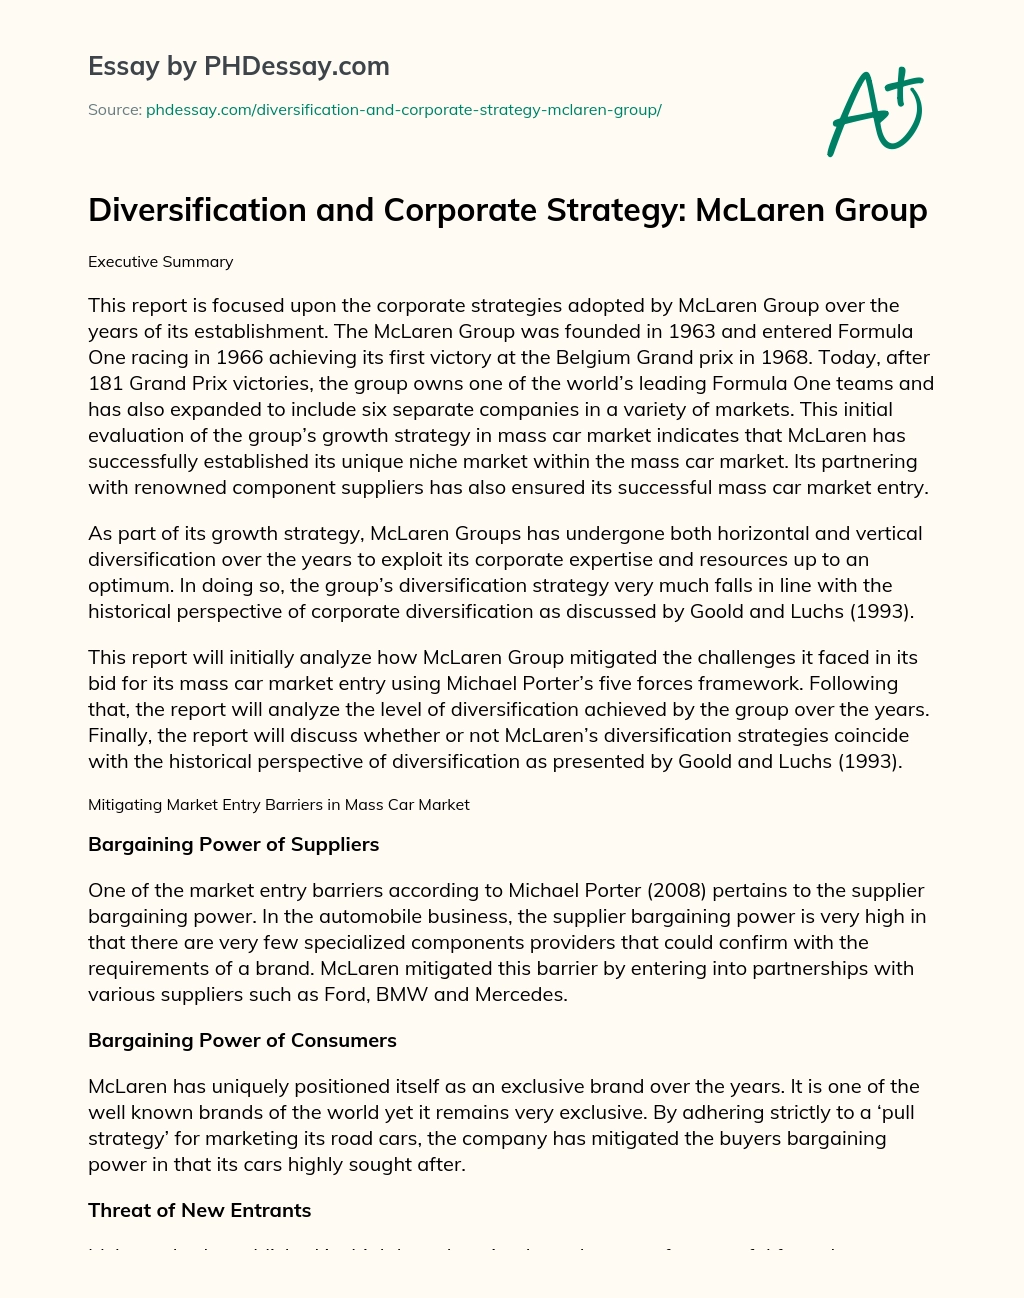 Diversification and Corporate Strategy: McLaren Group essay